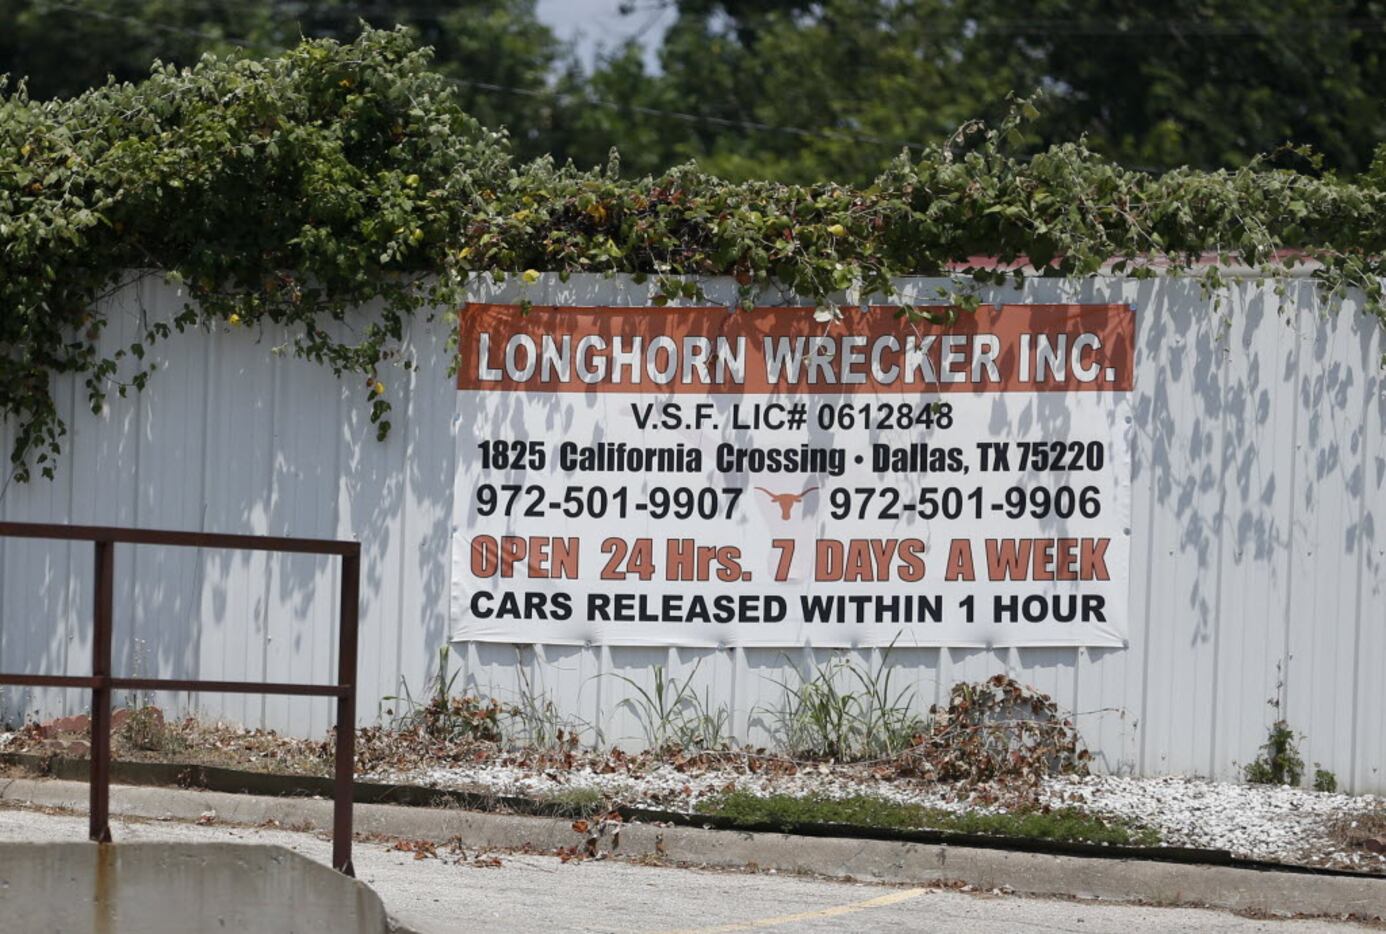 Longhorn Wrecker of Dallas was one of the most heavily penalized towing companies in the...